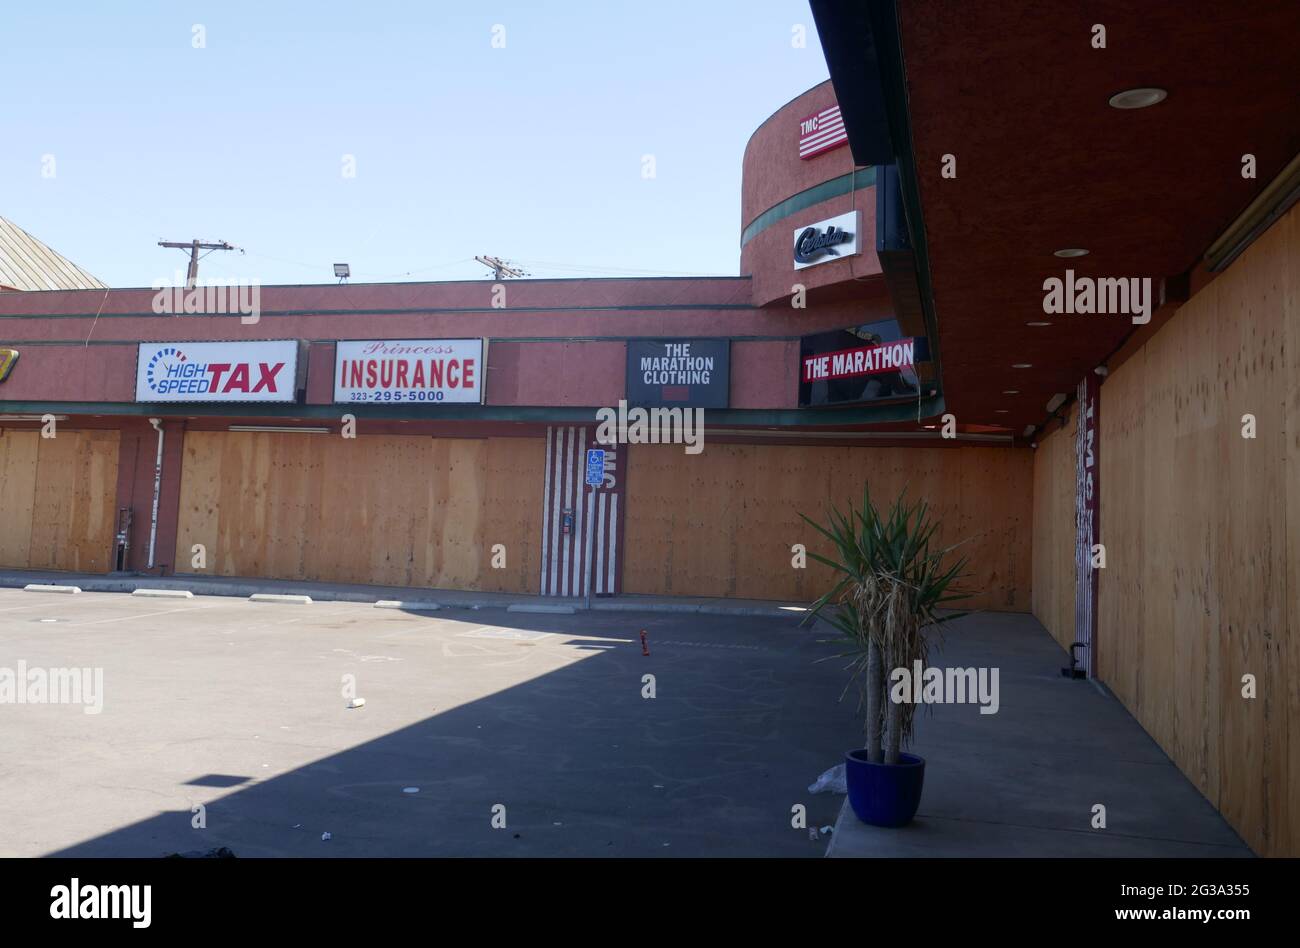 Los Angeles, California, USA 14th June 2021 A general view of atmosphere of Rapper Nipsey Hussle's The Marathon Clothing Store where he was murdered March 31, 2019, now boarded up closed with Street Art Memorial Murals on June 14, 2021 in Los Angeles, California, USA. Photo by Barry King/Alamy Stock Photo Stock Photo